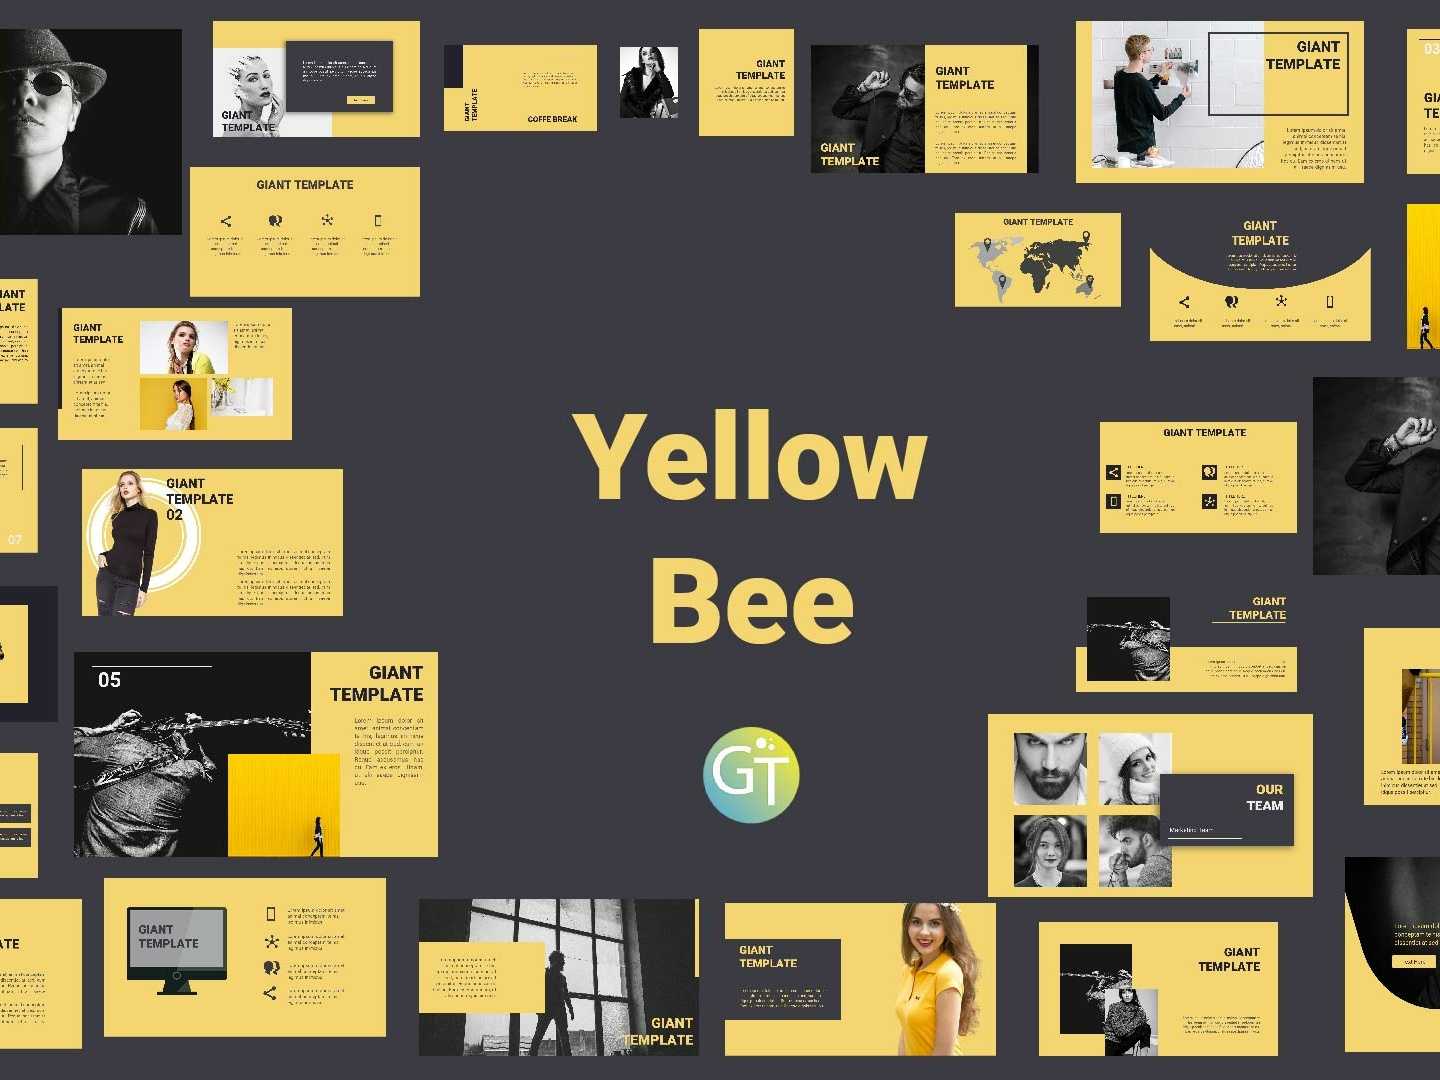 Yellowbee Free Powerpoint Template Free Downloadgiant Inside Powerpoint Animation Templates Free Download